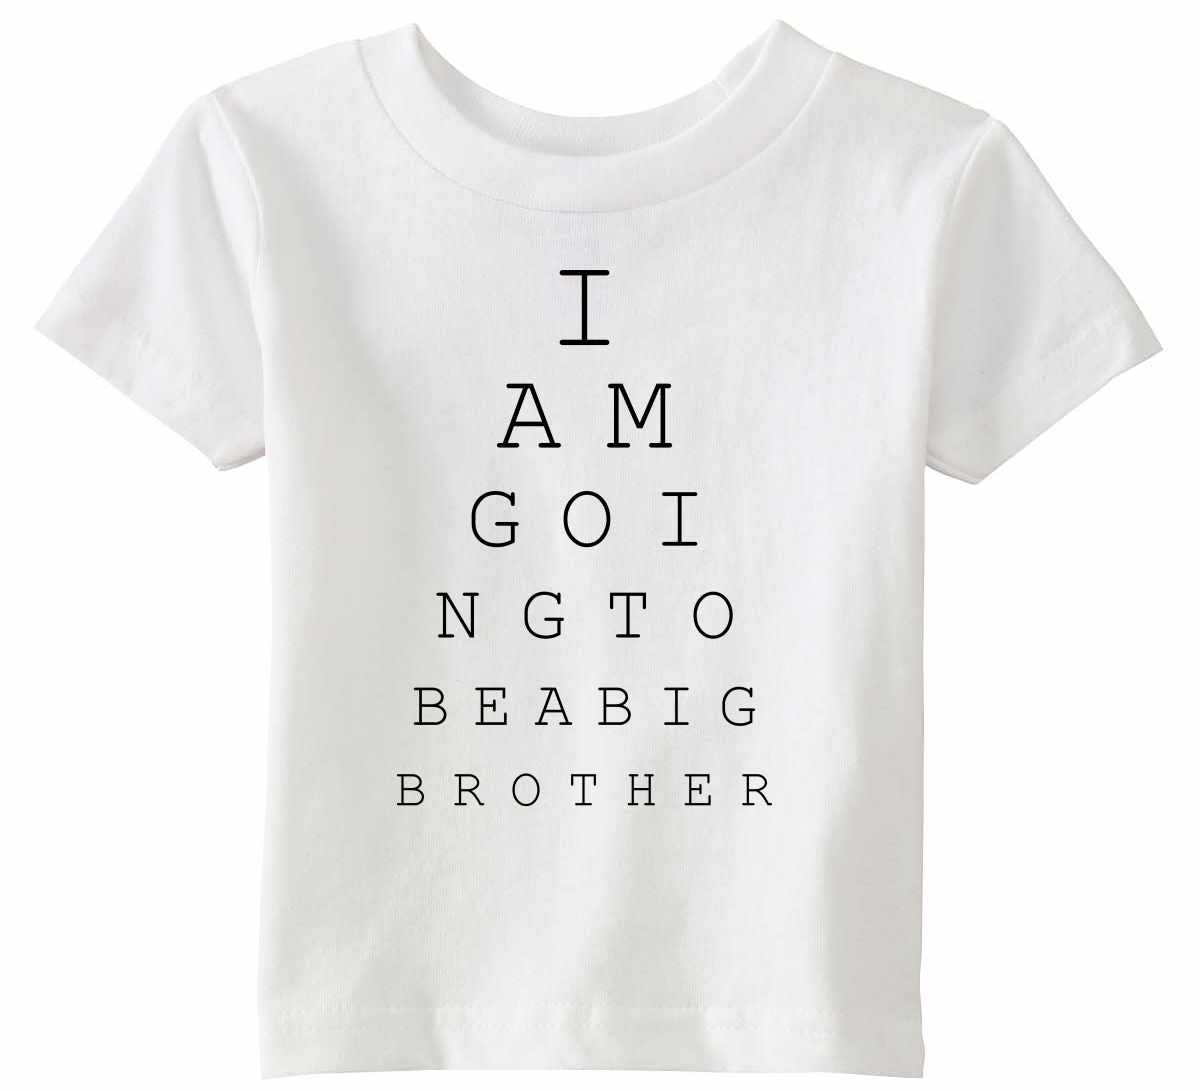 I AM GOING TO BE BIG BROTHER EYE CHART Infant/Toddler 